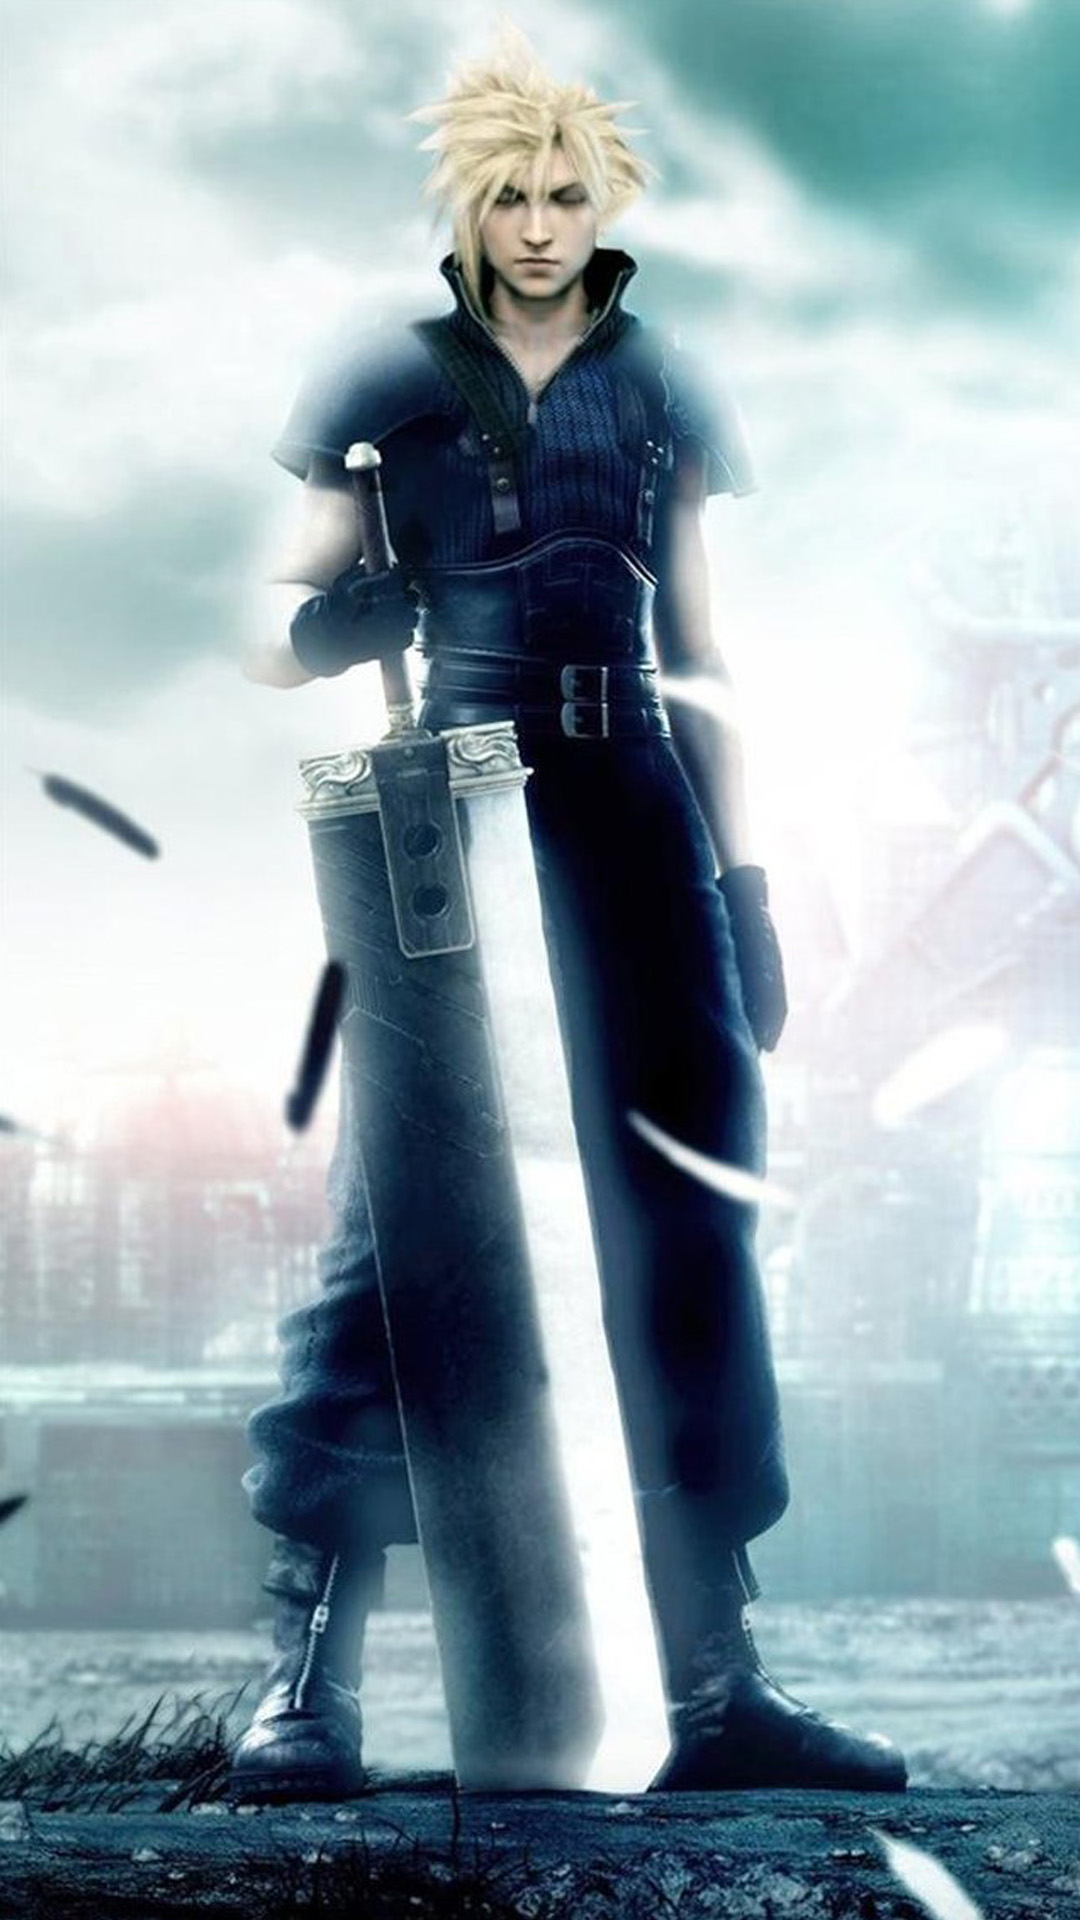 Final Fantasy 7 Cloud Strife Android Wallpaper Android HD